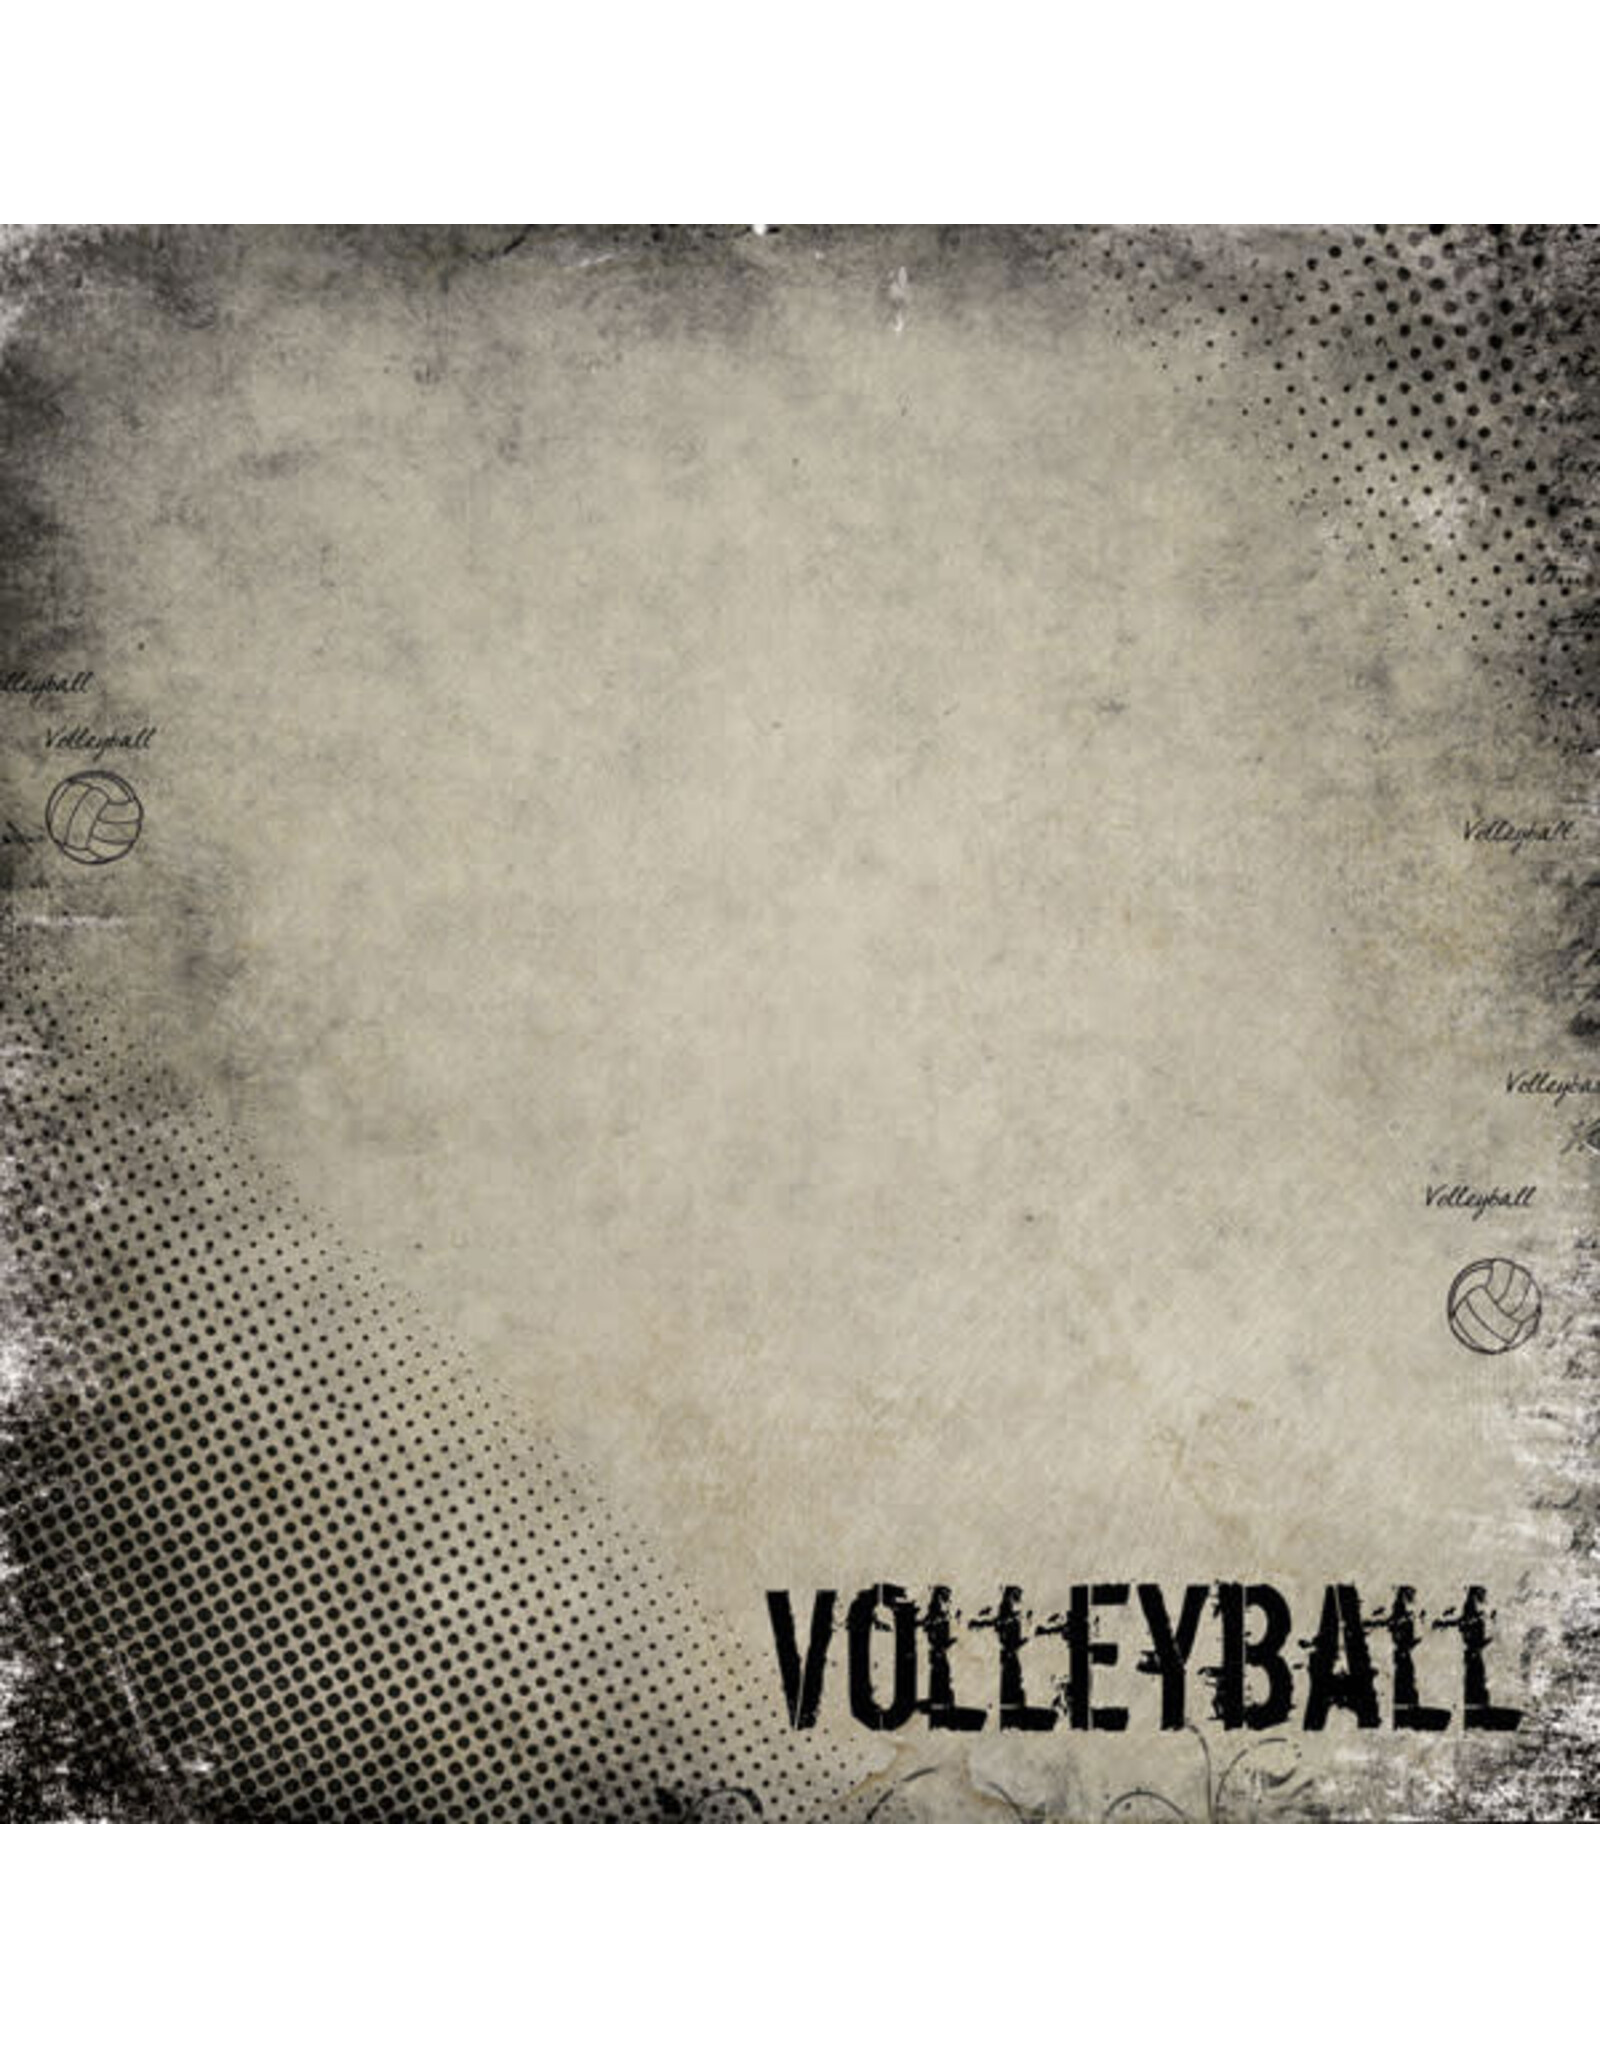 Volleyball antique paper